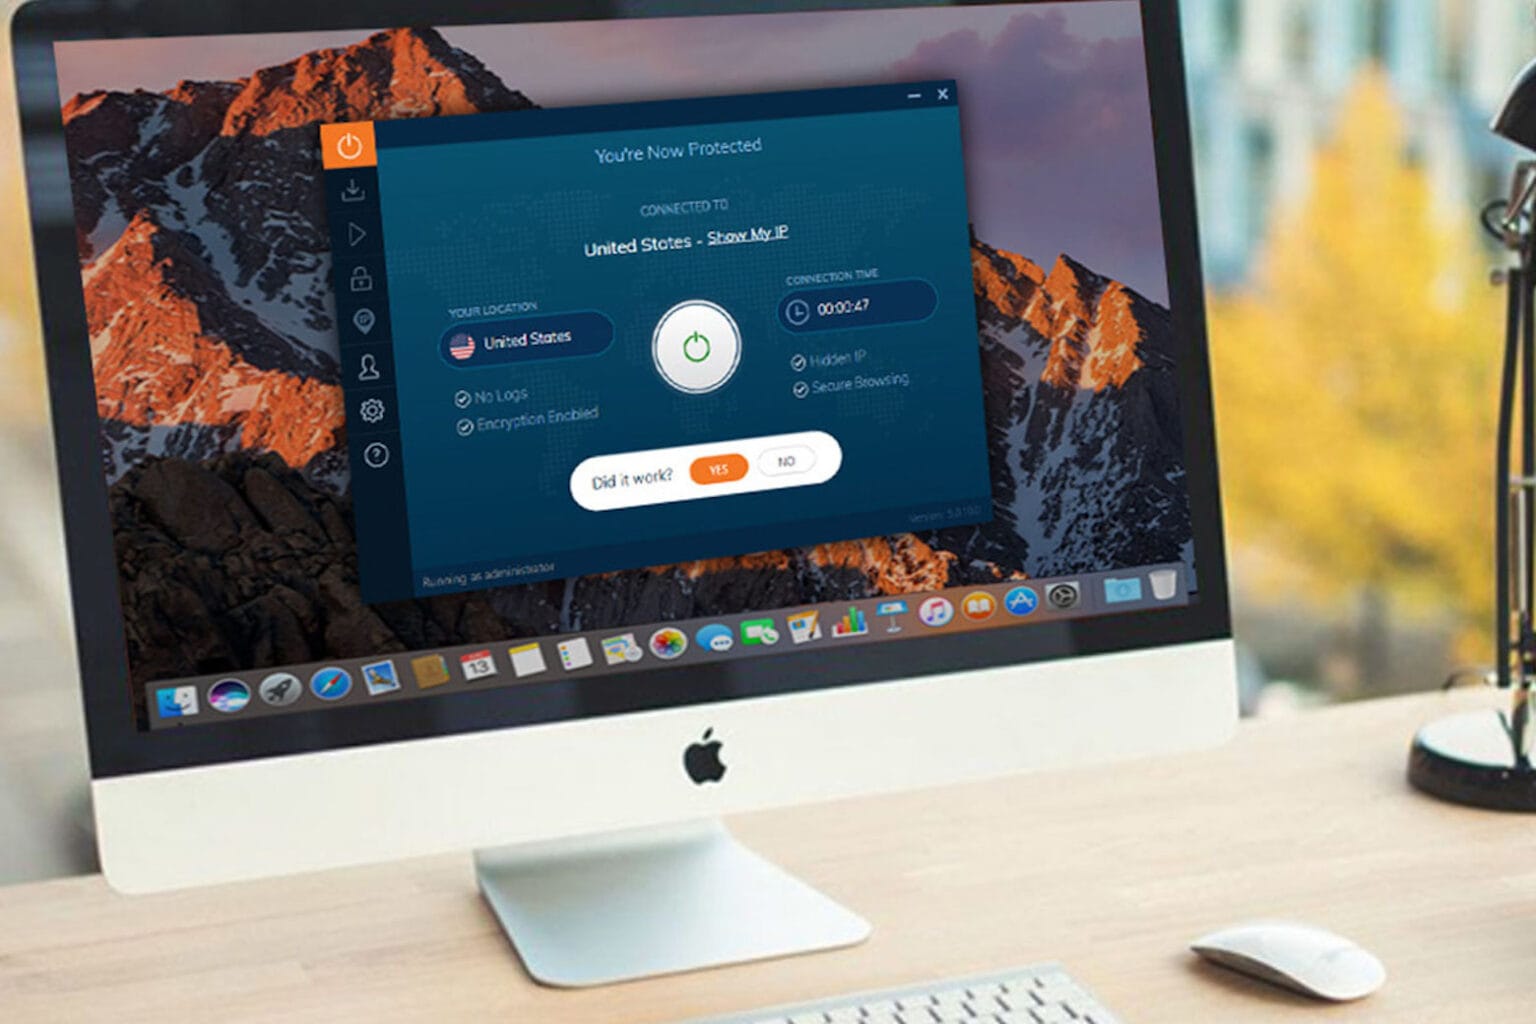 Surf the web anonymously no matter where you go with this discounted VPN subscription.